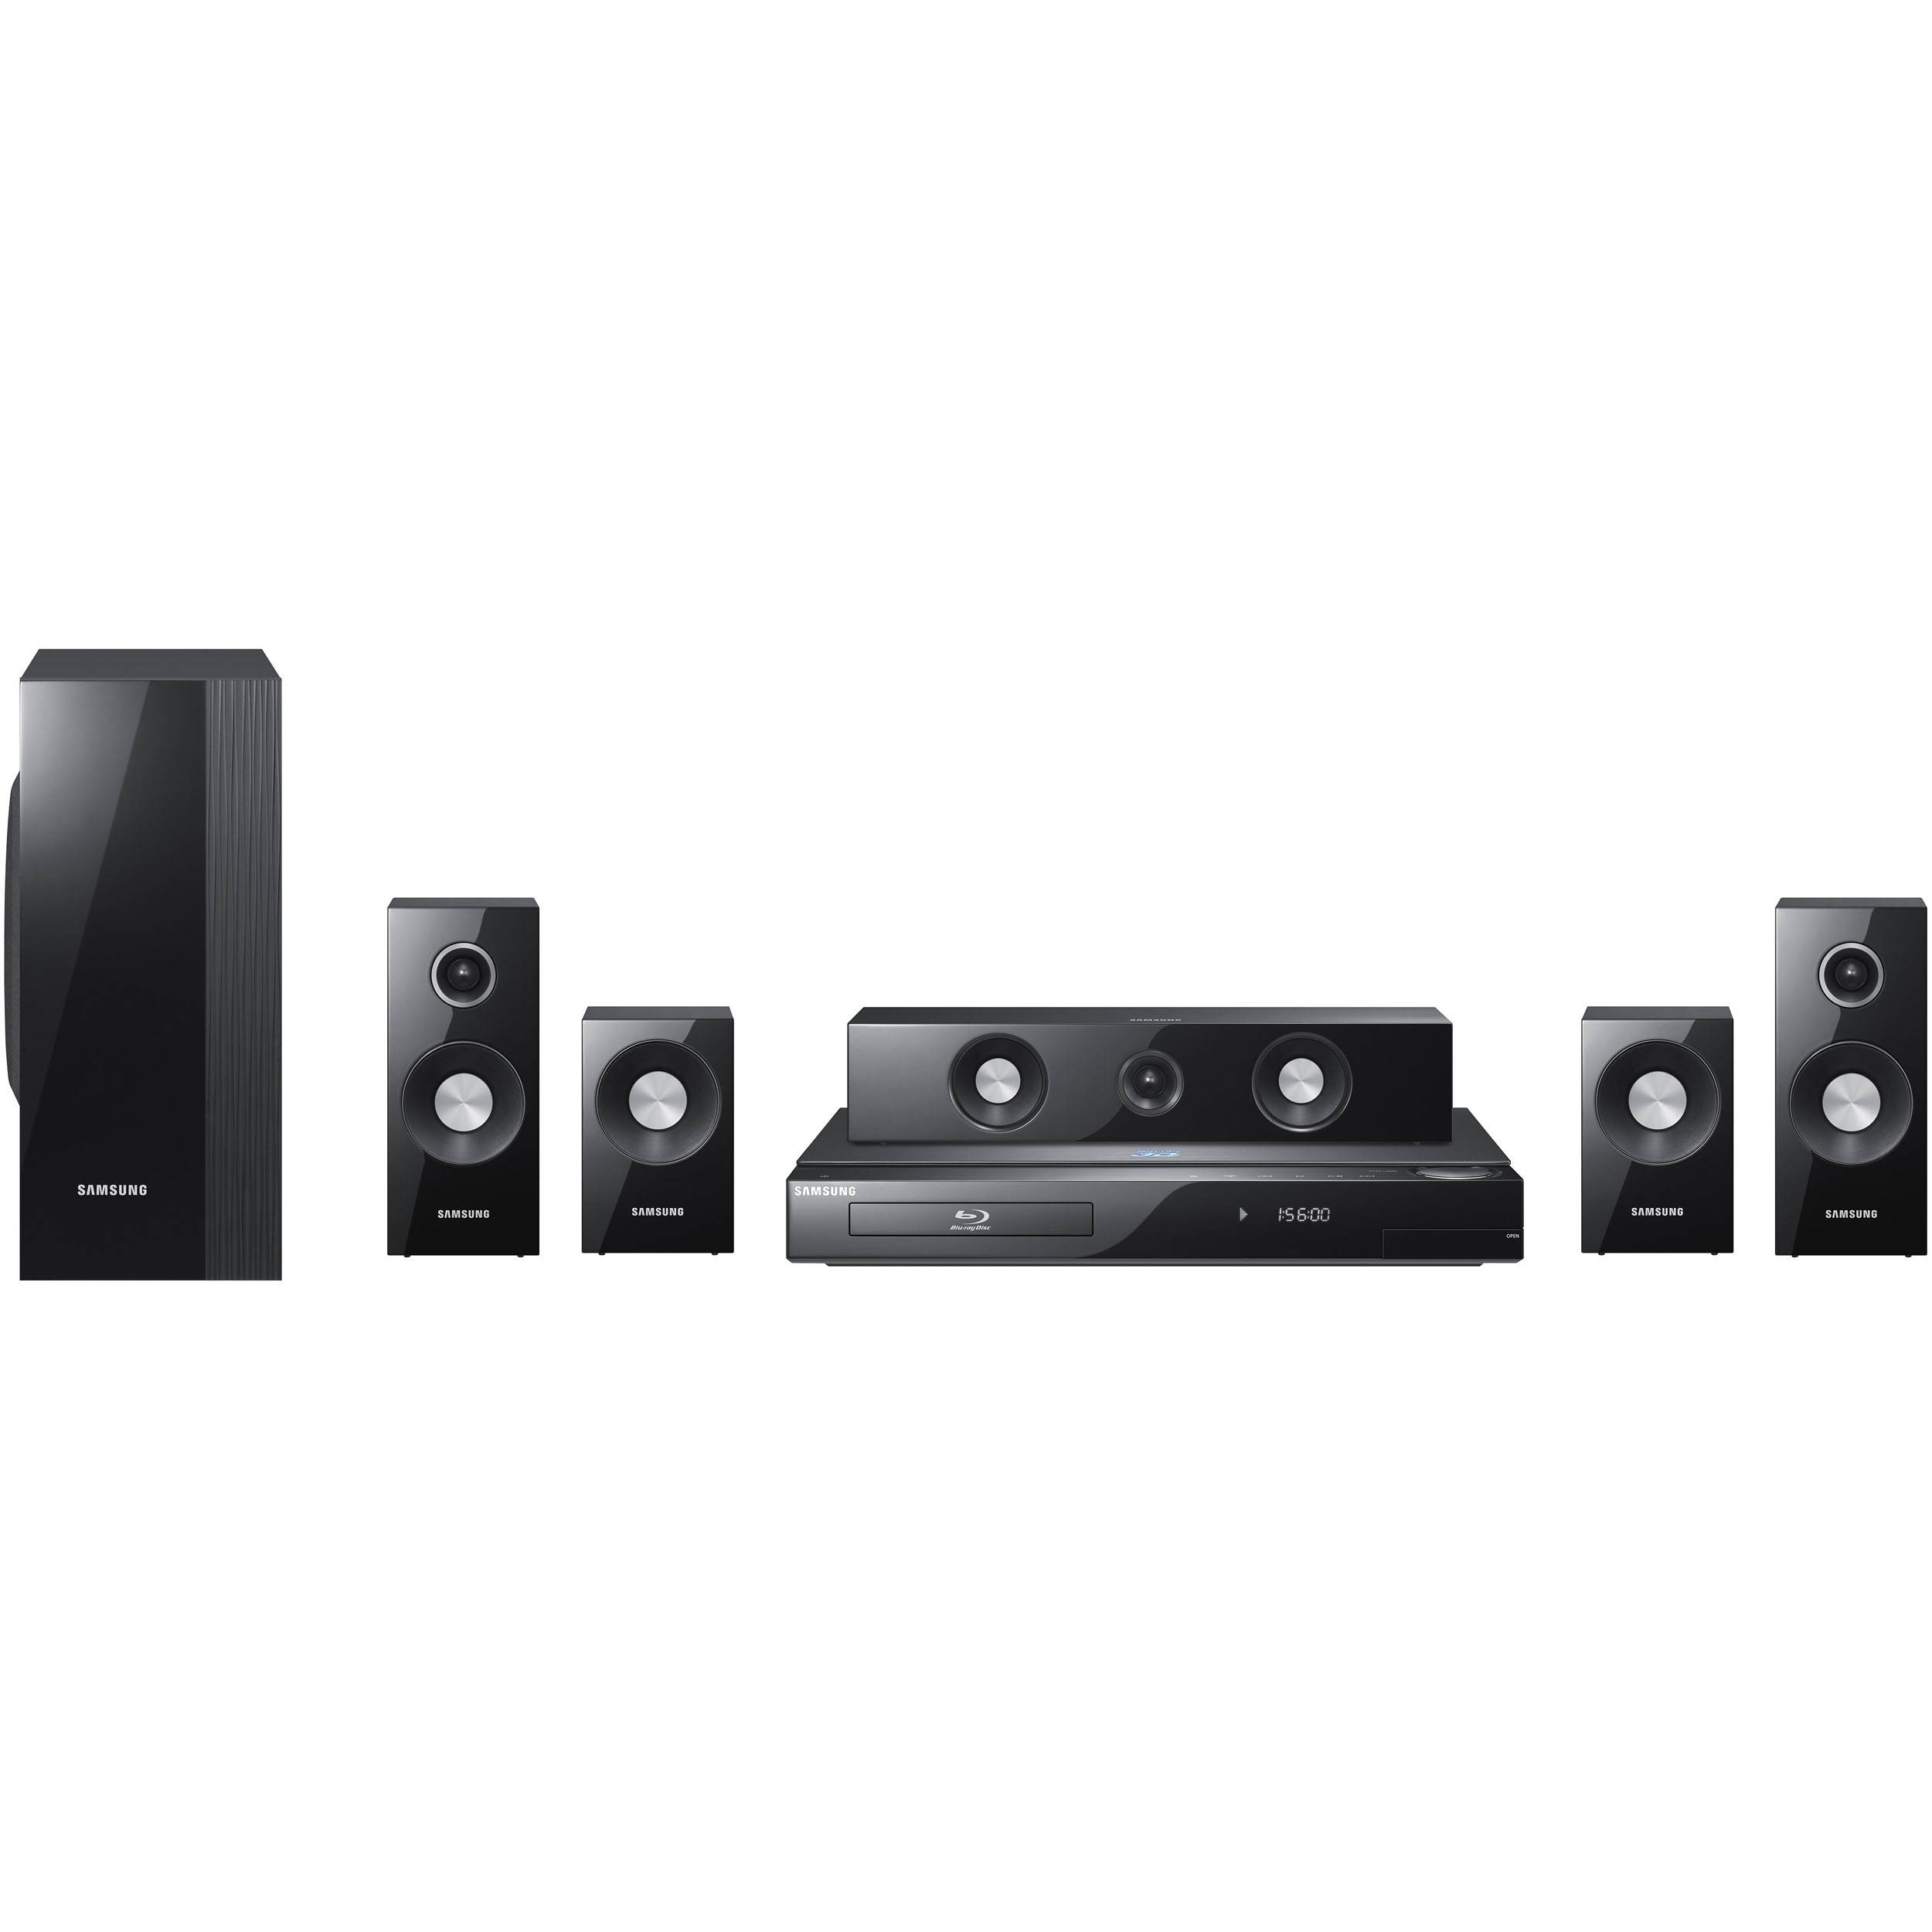 Samsung Ht C6600 5 1 Channel Blu Ray Home Theater System